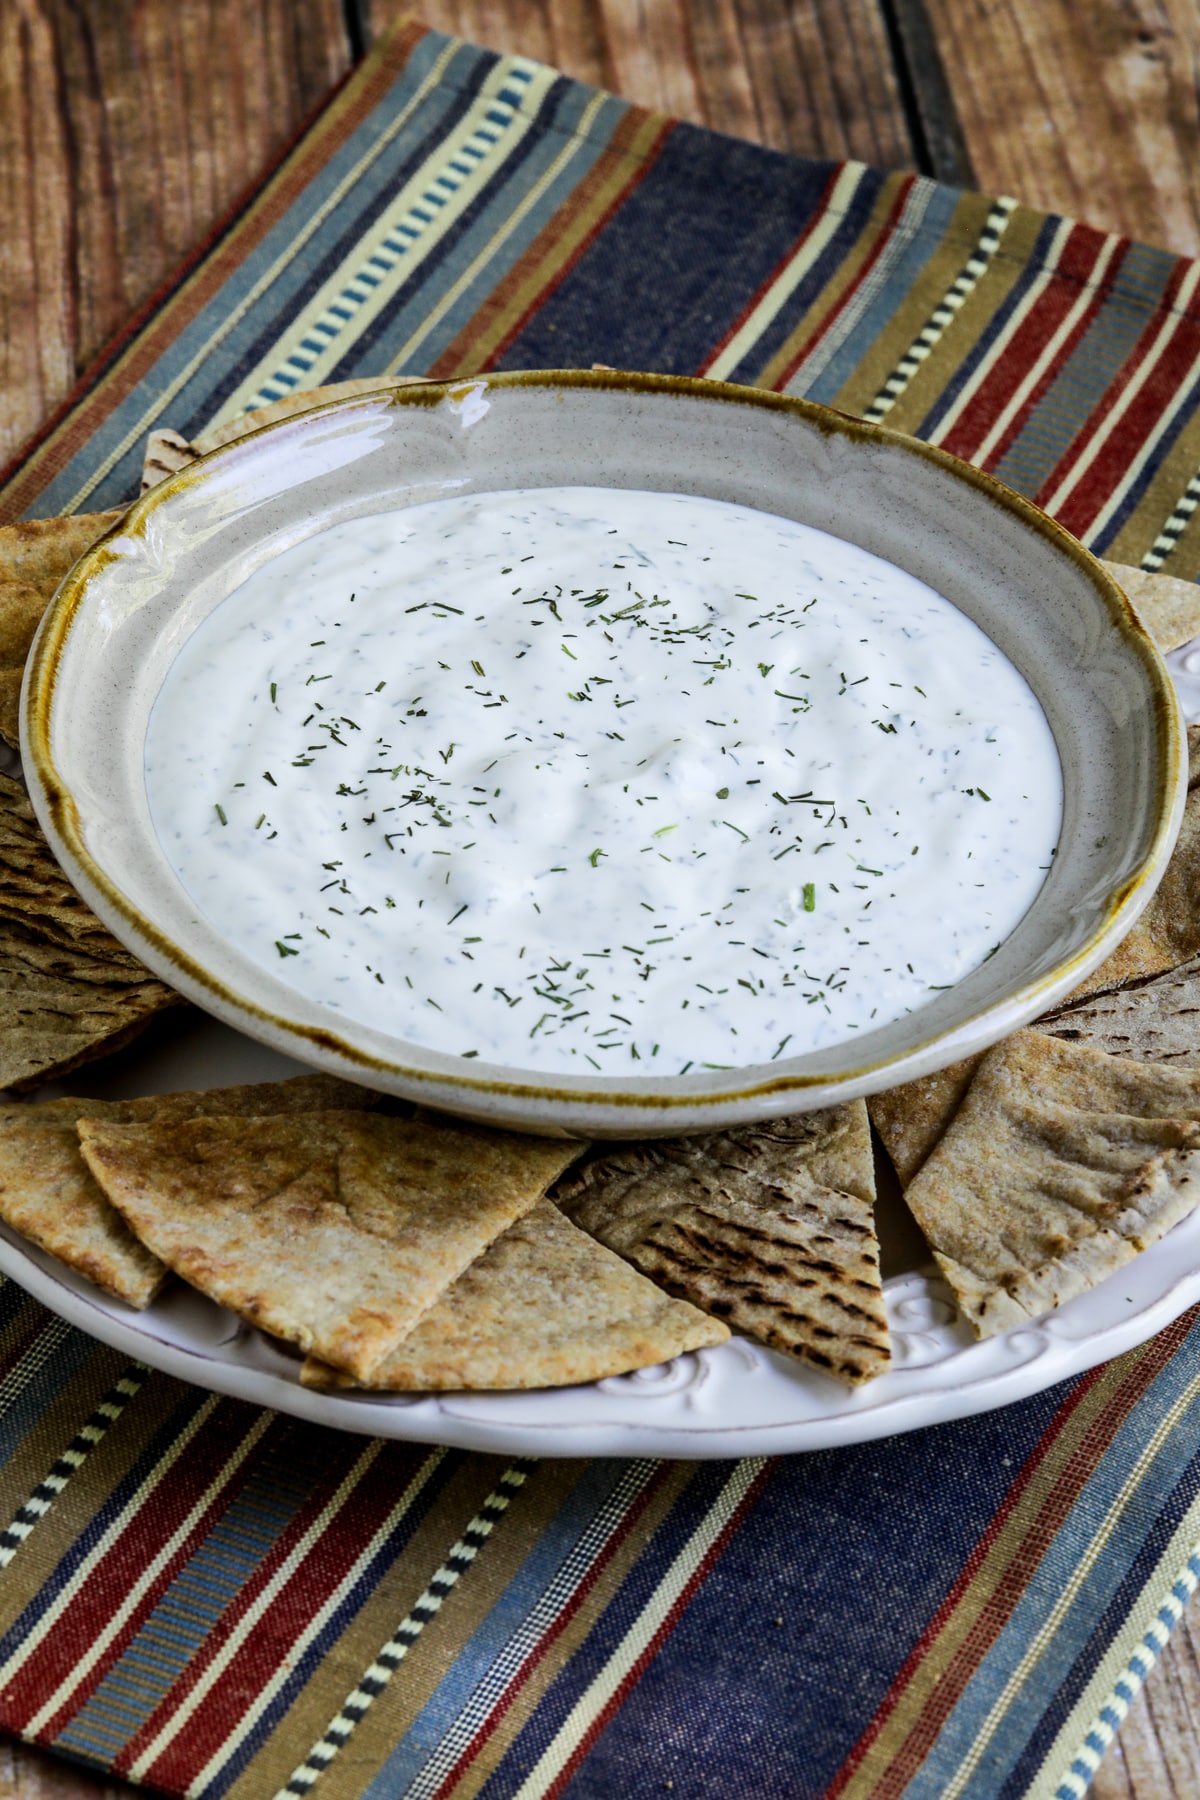 Tzatziki Sauce shown in bowl on plate with pita bread.